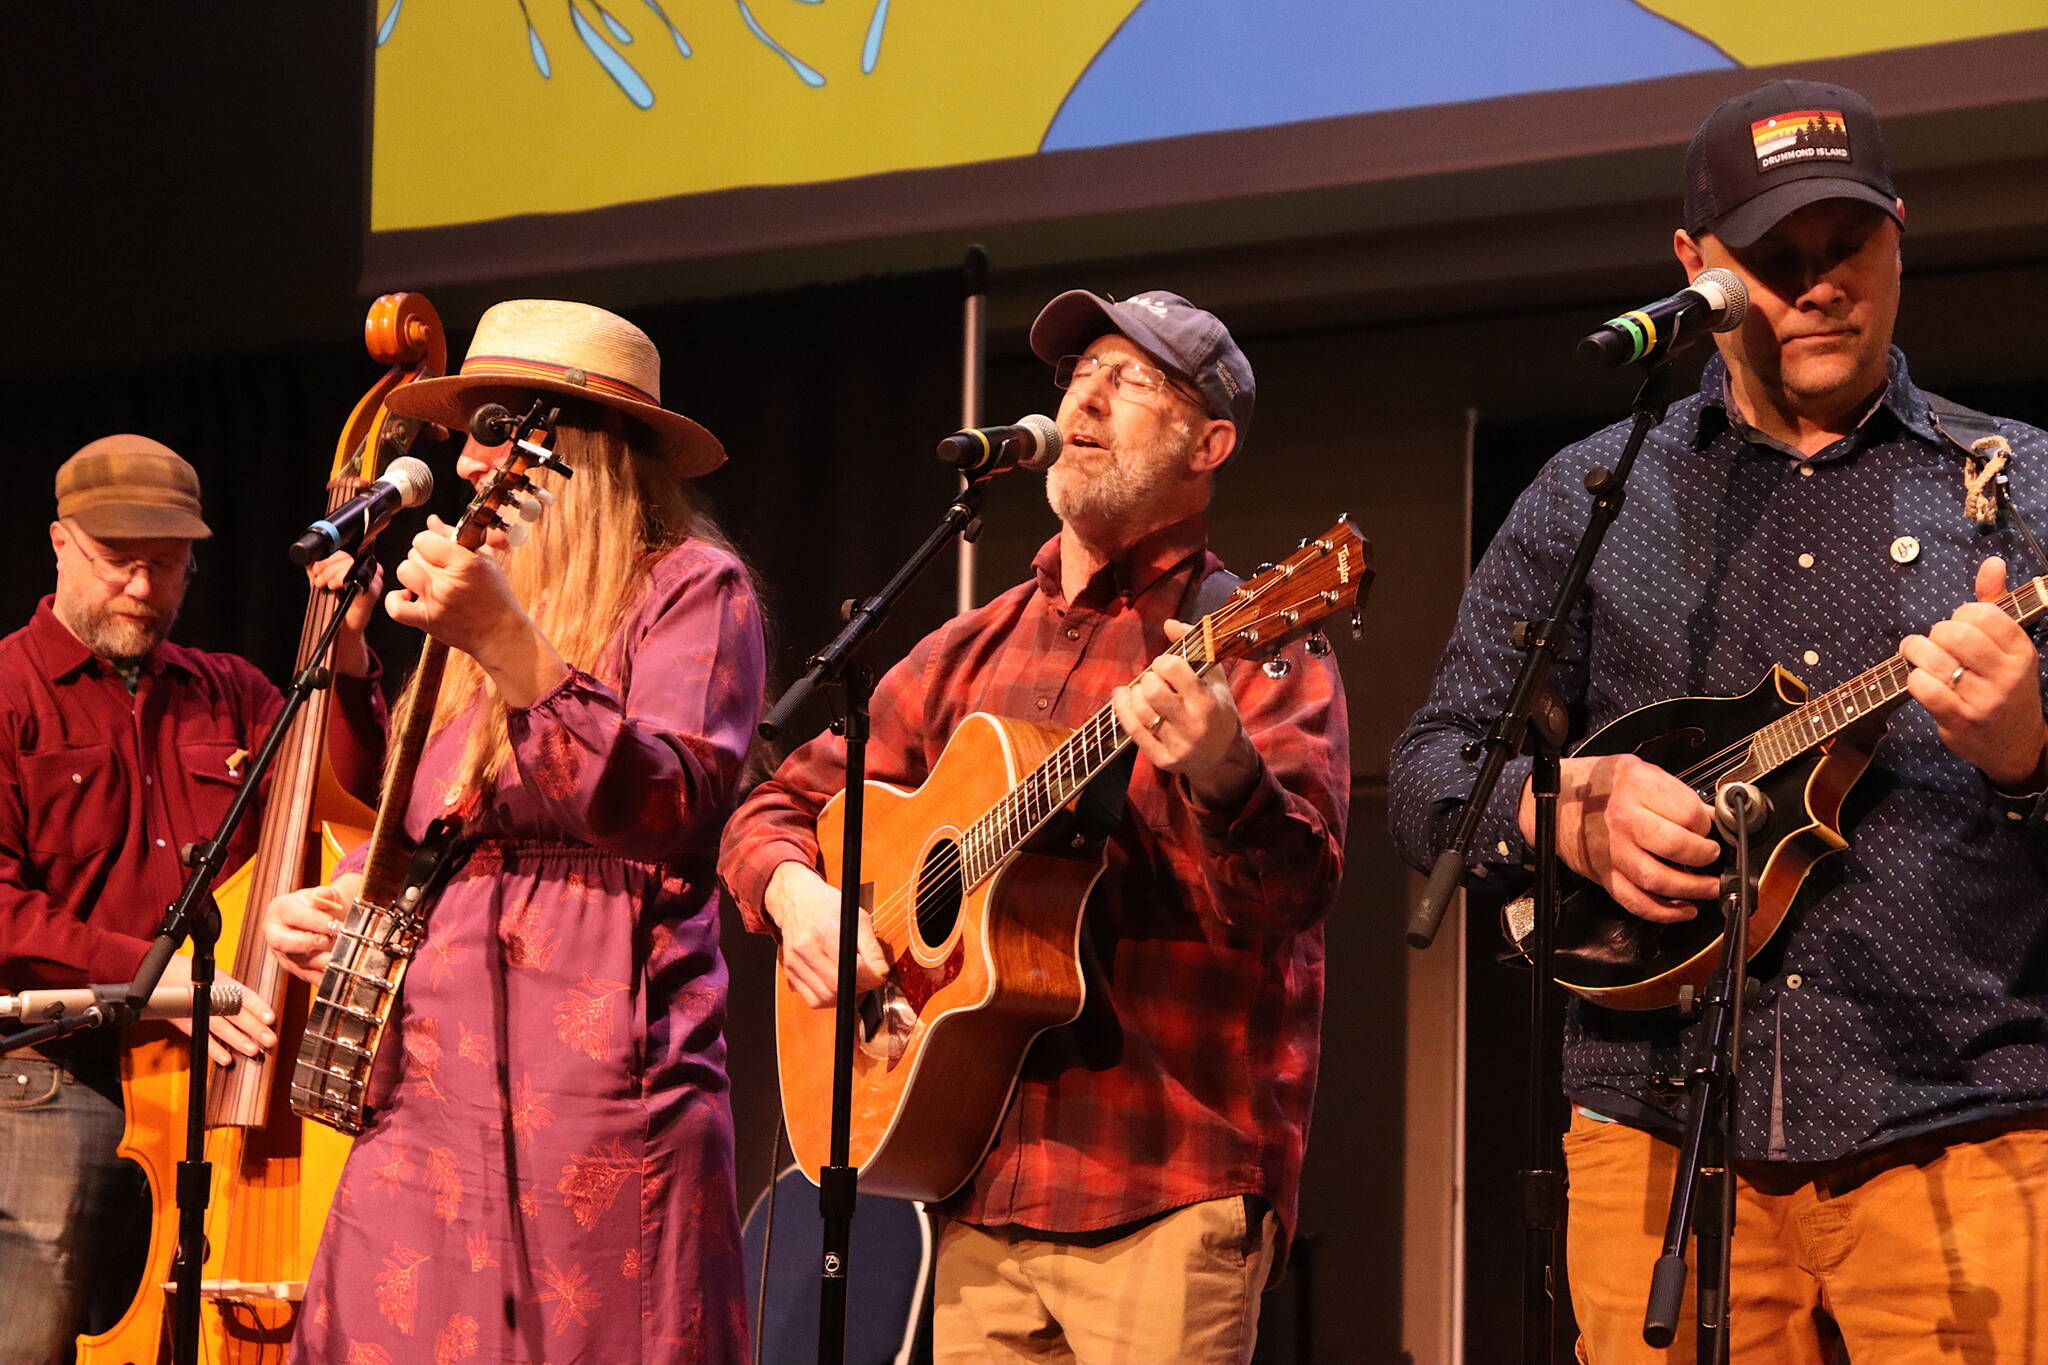 The Gustavus band Tramwreck performs on the main stage in the ballroom at Centennial Hall during the opening night of the 49th annual Alaska Folk Festival on Monday. (Mark Sabbatini/Juneau Empire)